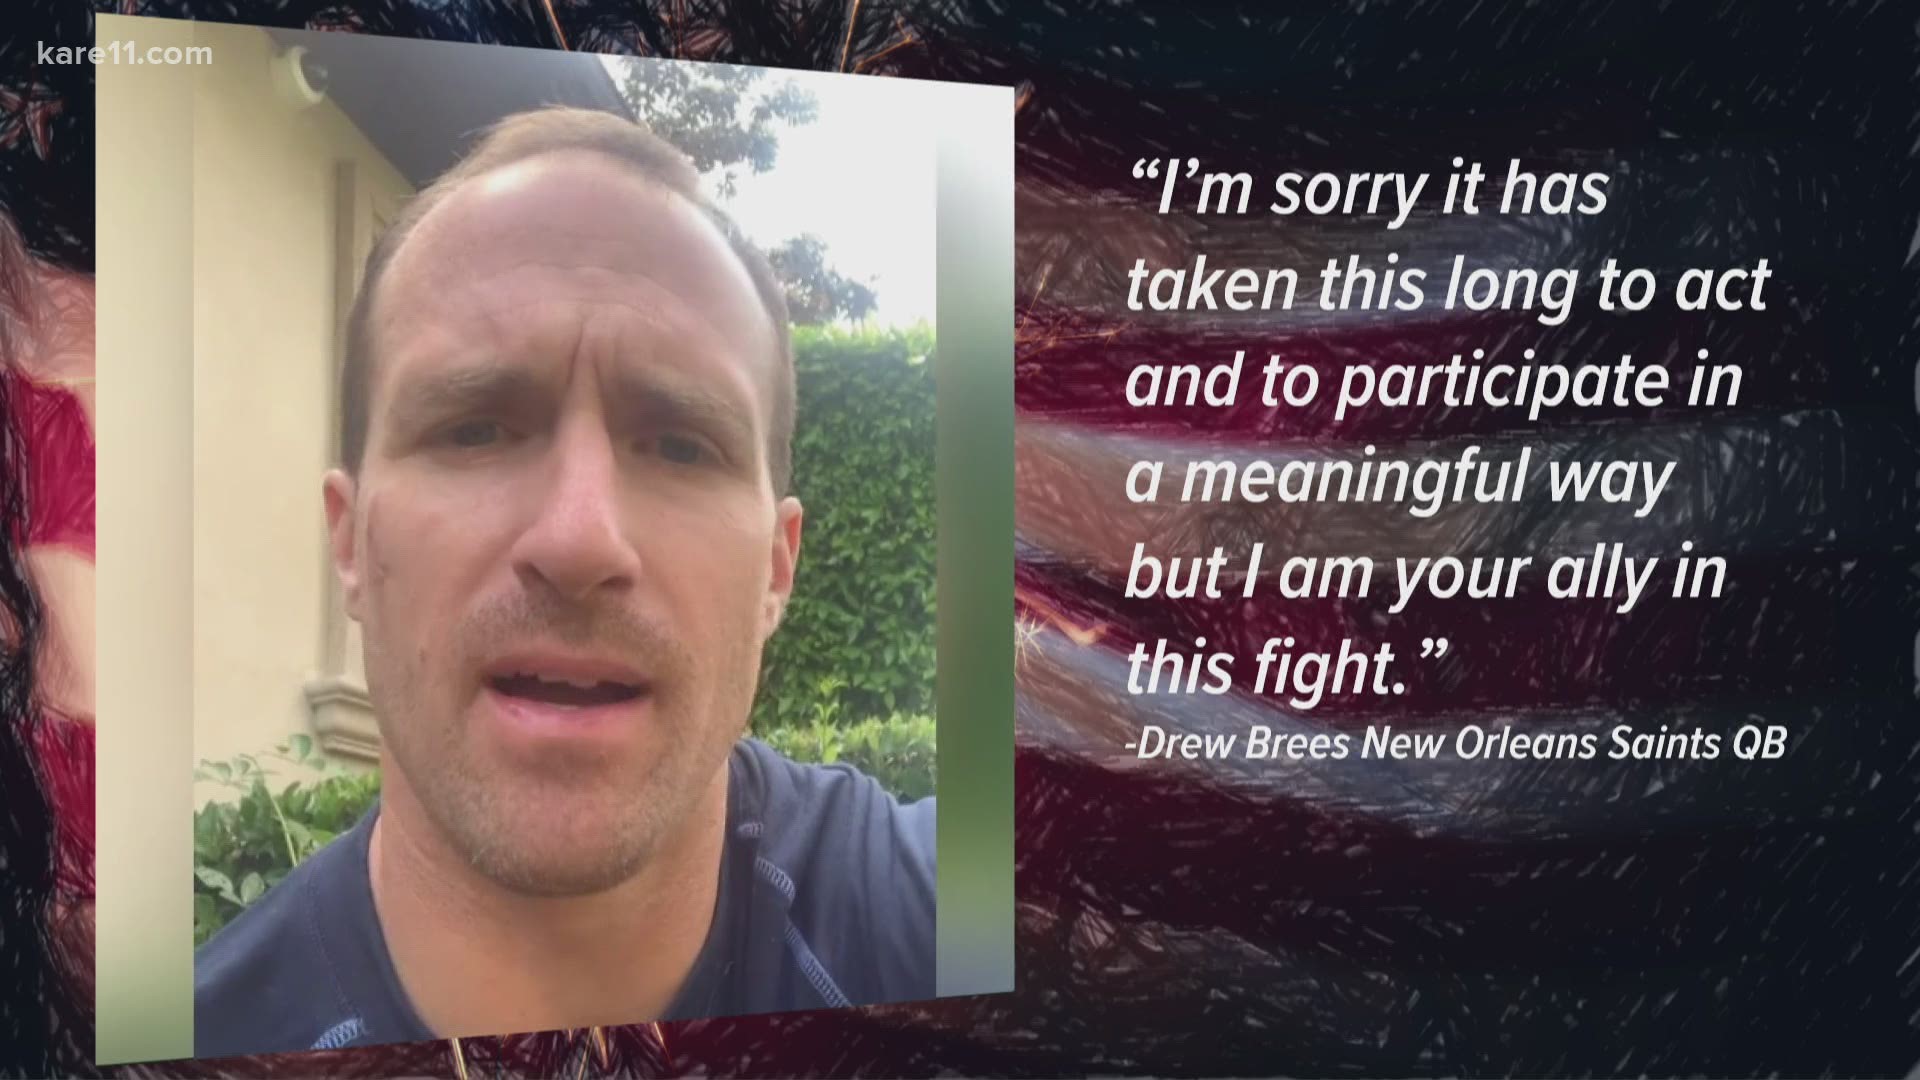 An apology just isn't cutting it for some people, after Saints QB Drew Brees tried to quiet the firestorm ignited by his comments about kneeling during the anthem.